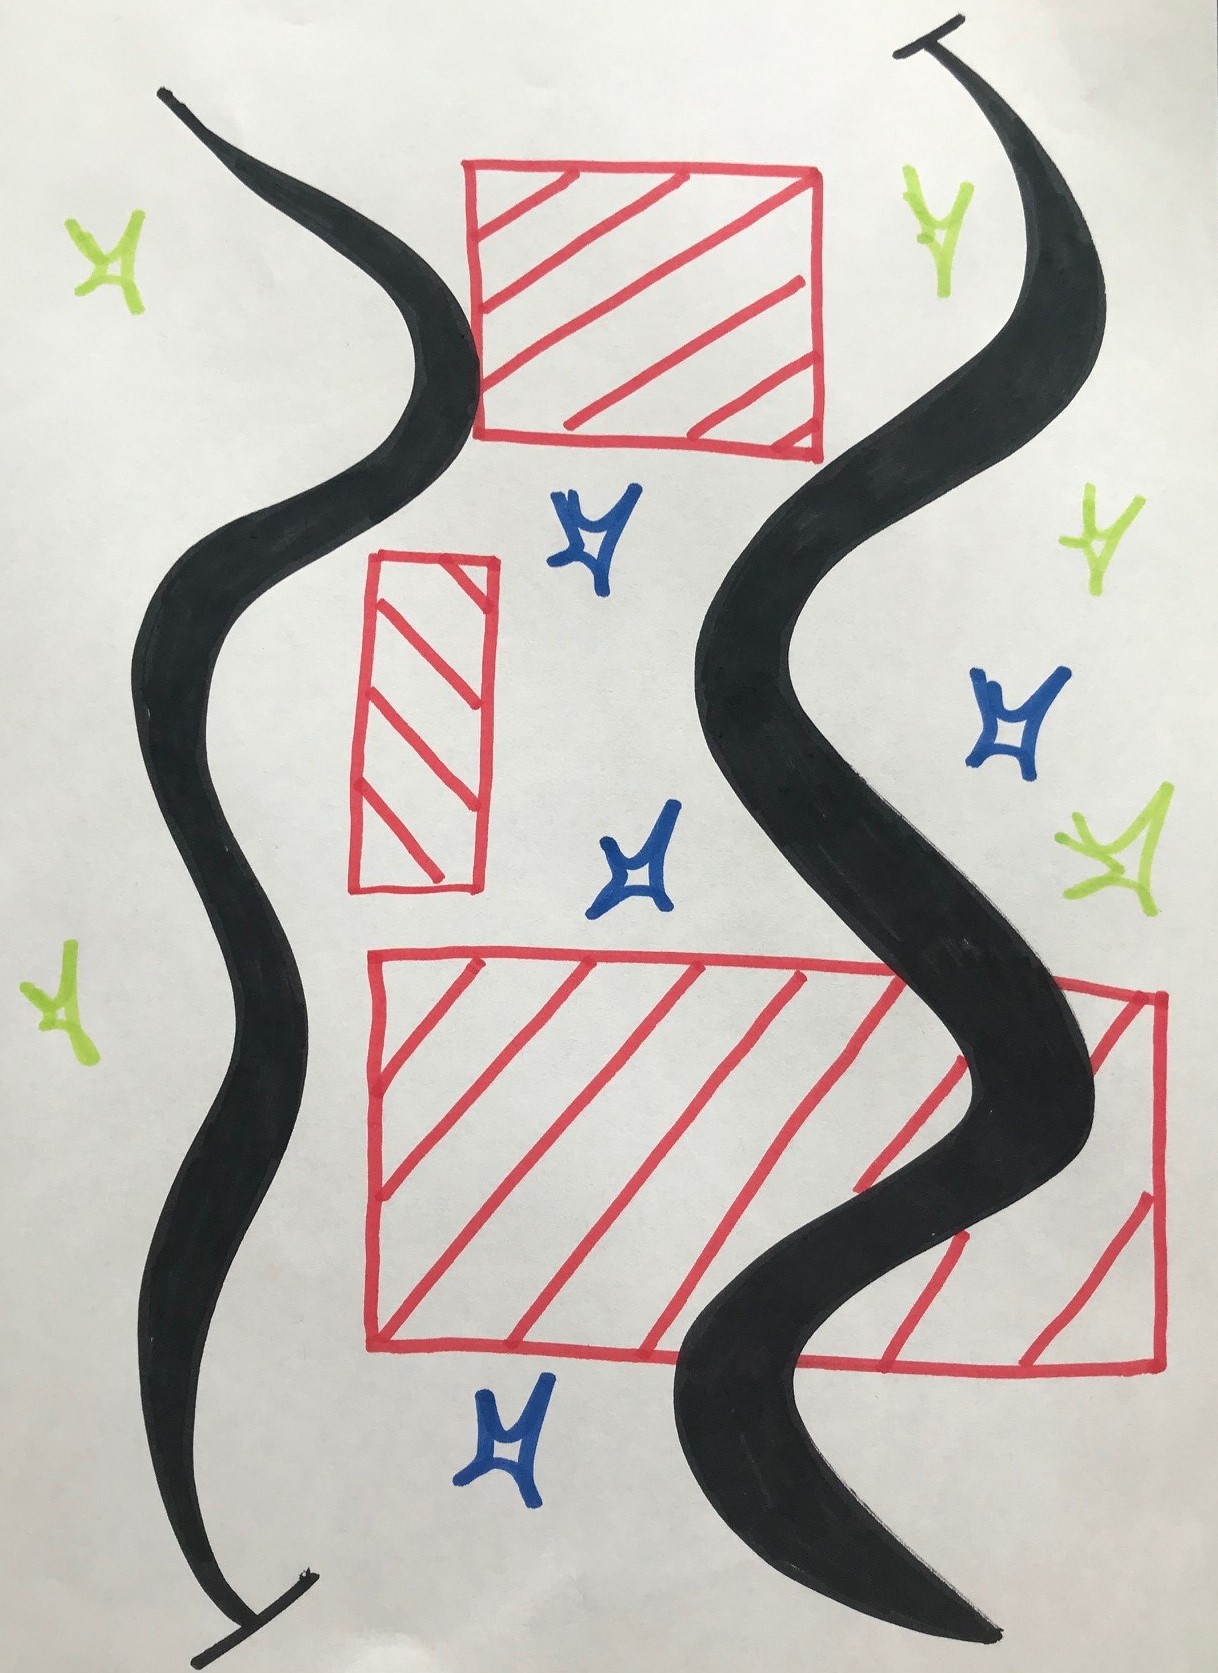 Drawing with red blocks, green and blue flashes with two thick black curly lines.